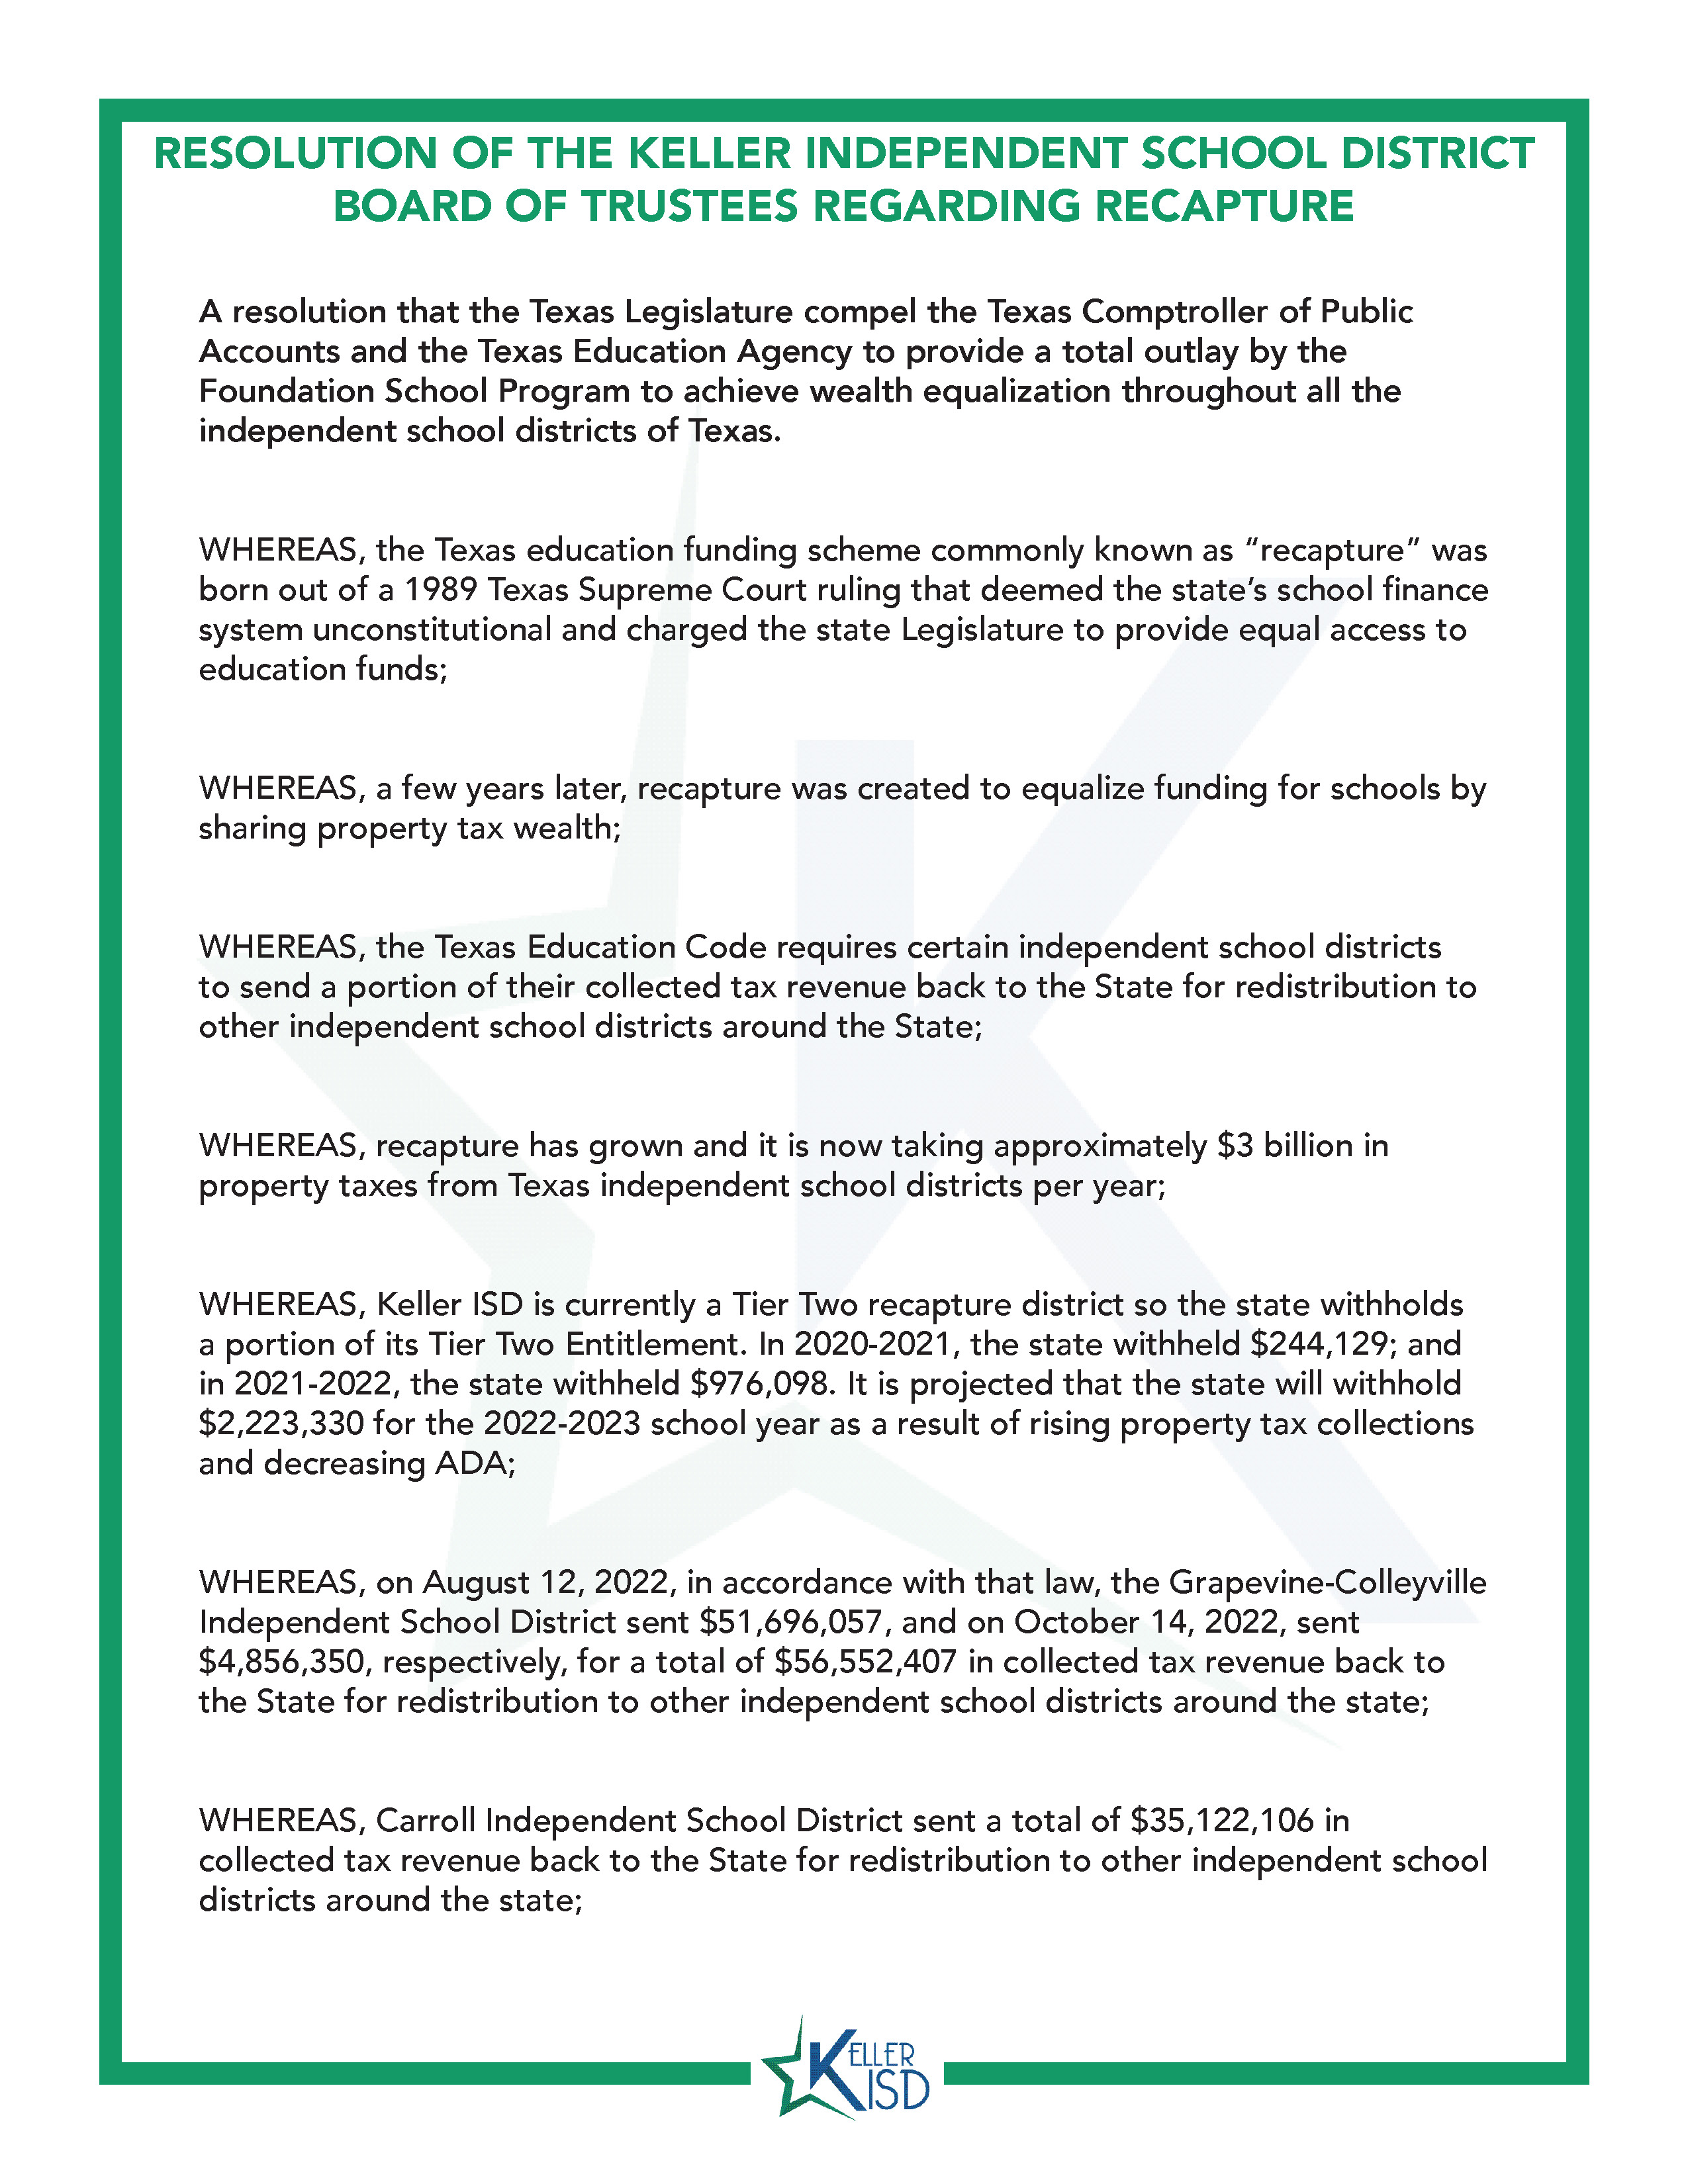 Screenshot of a resolution from the Board of Trustees; click for full PDF